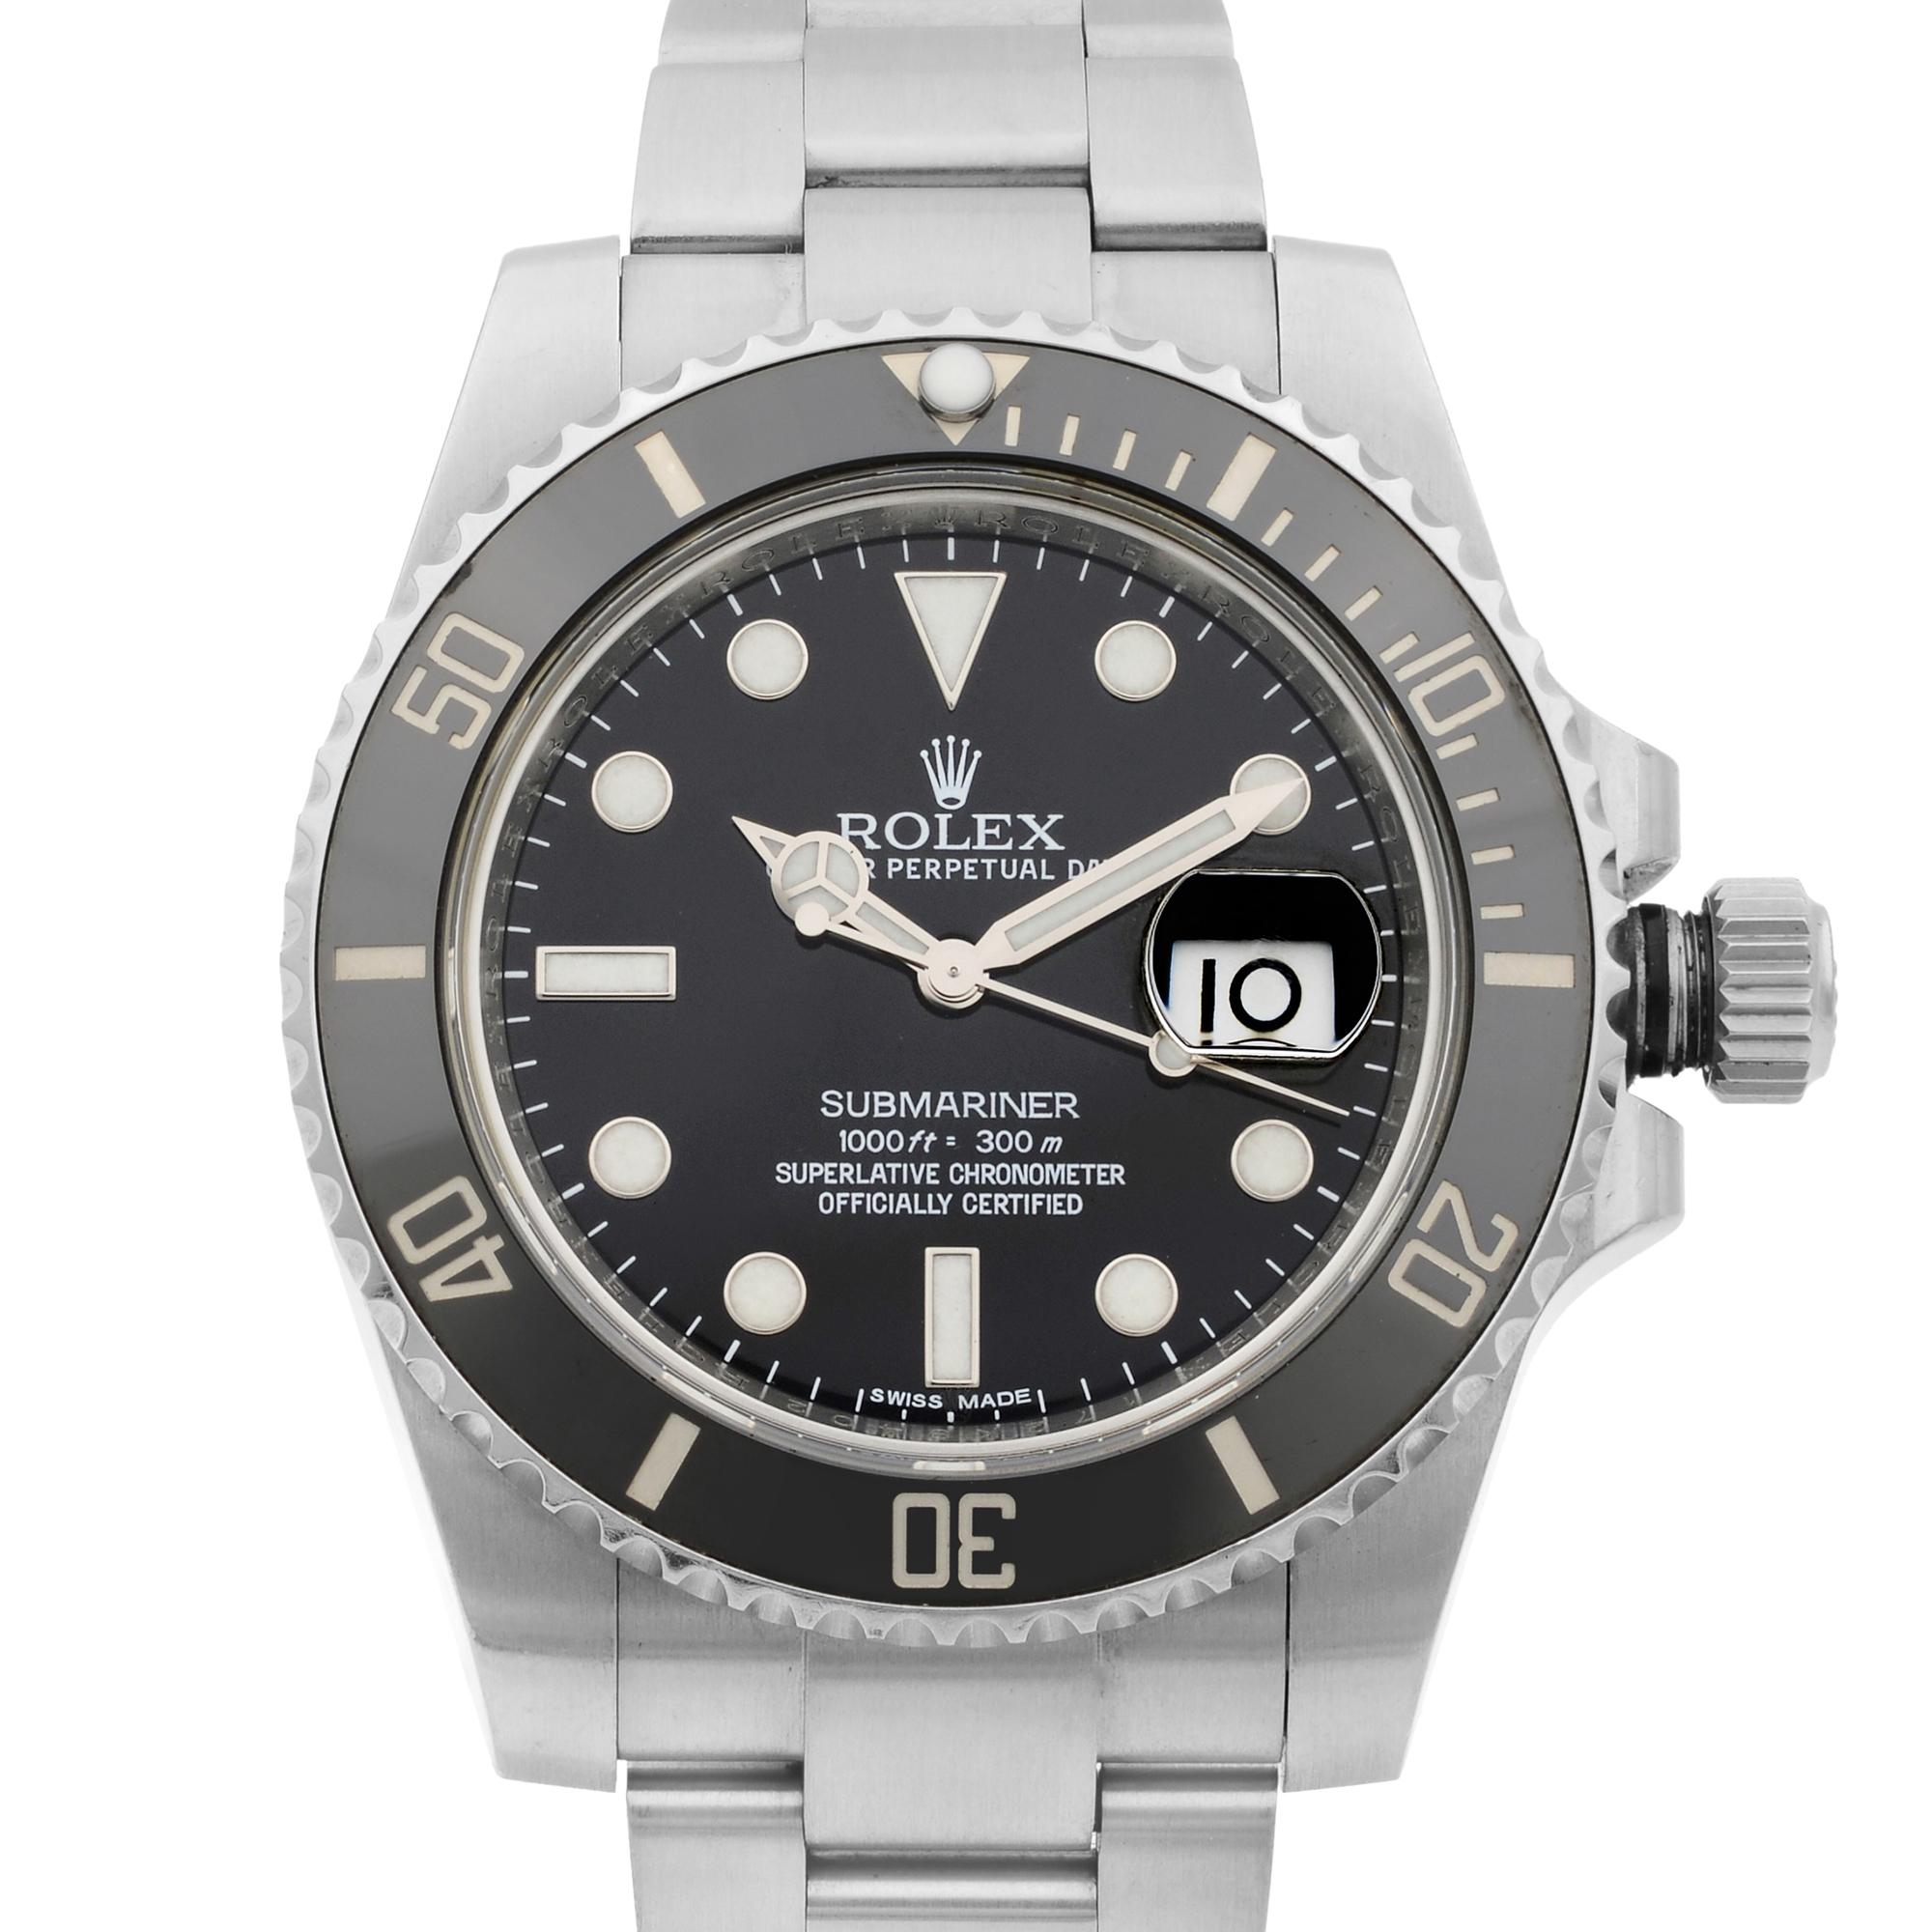 This pre-owned Rolex Submariner 116610LN  is a beautiful men's timepiece that is powered by a mechanical (automatic) movement which is cased in a stainless steel case. It has a round shape face, date indicator dial, and has hand sticks & dots style